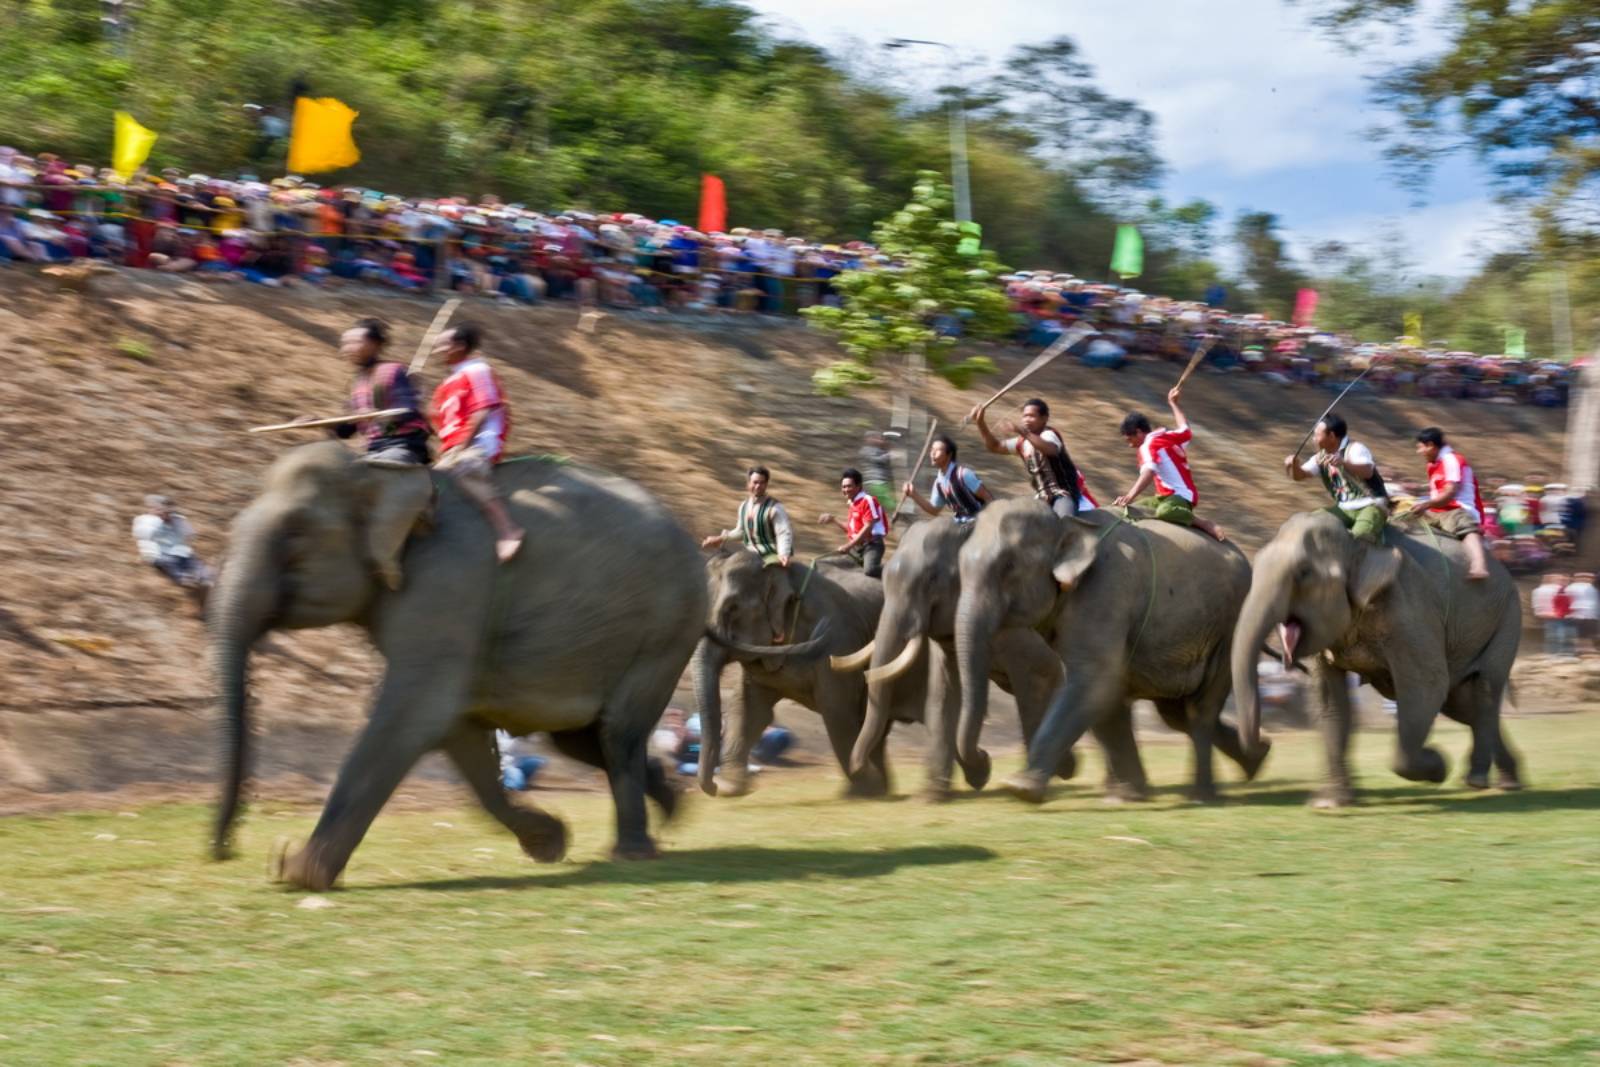 The Elephant Racing Festival In Dak - Tour Packages and Vacation | AOJourneyslak